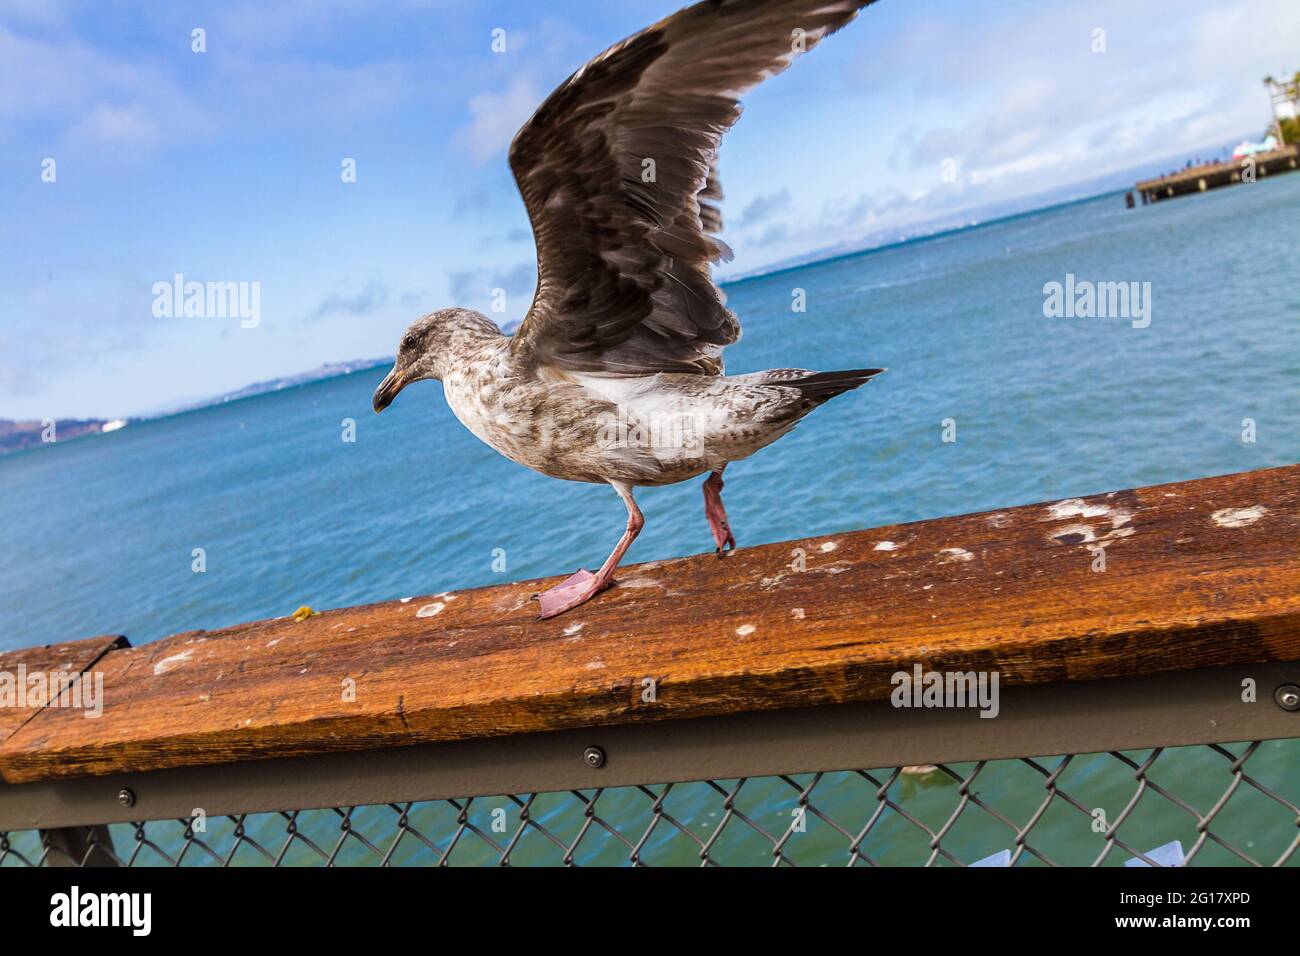 A California gull (Larus californicus) spreading its wings before flying away on Pier 39 in San Francisco Stock Photo